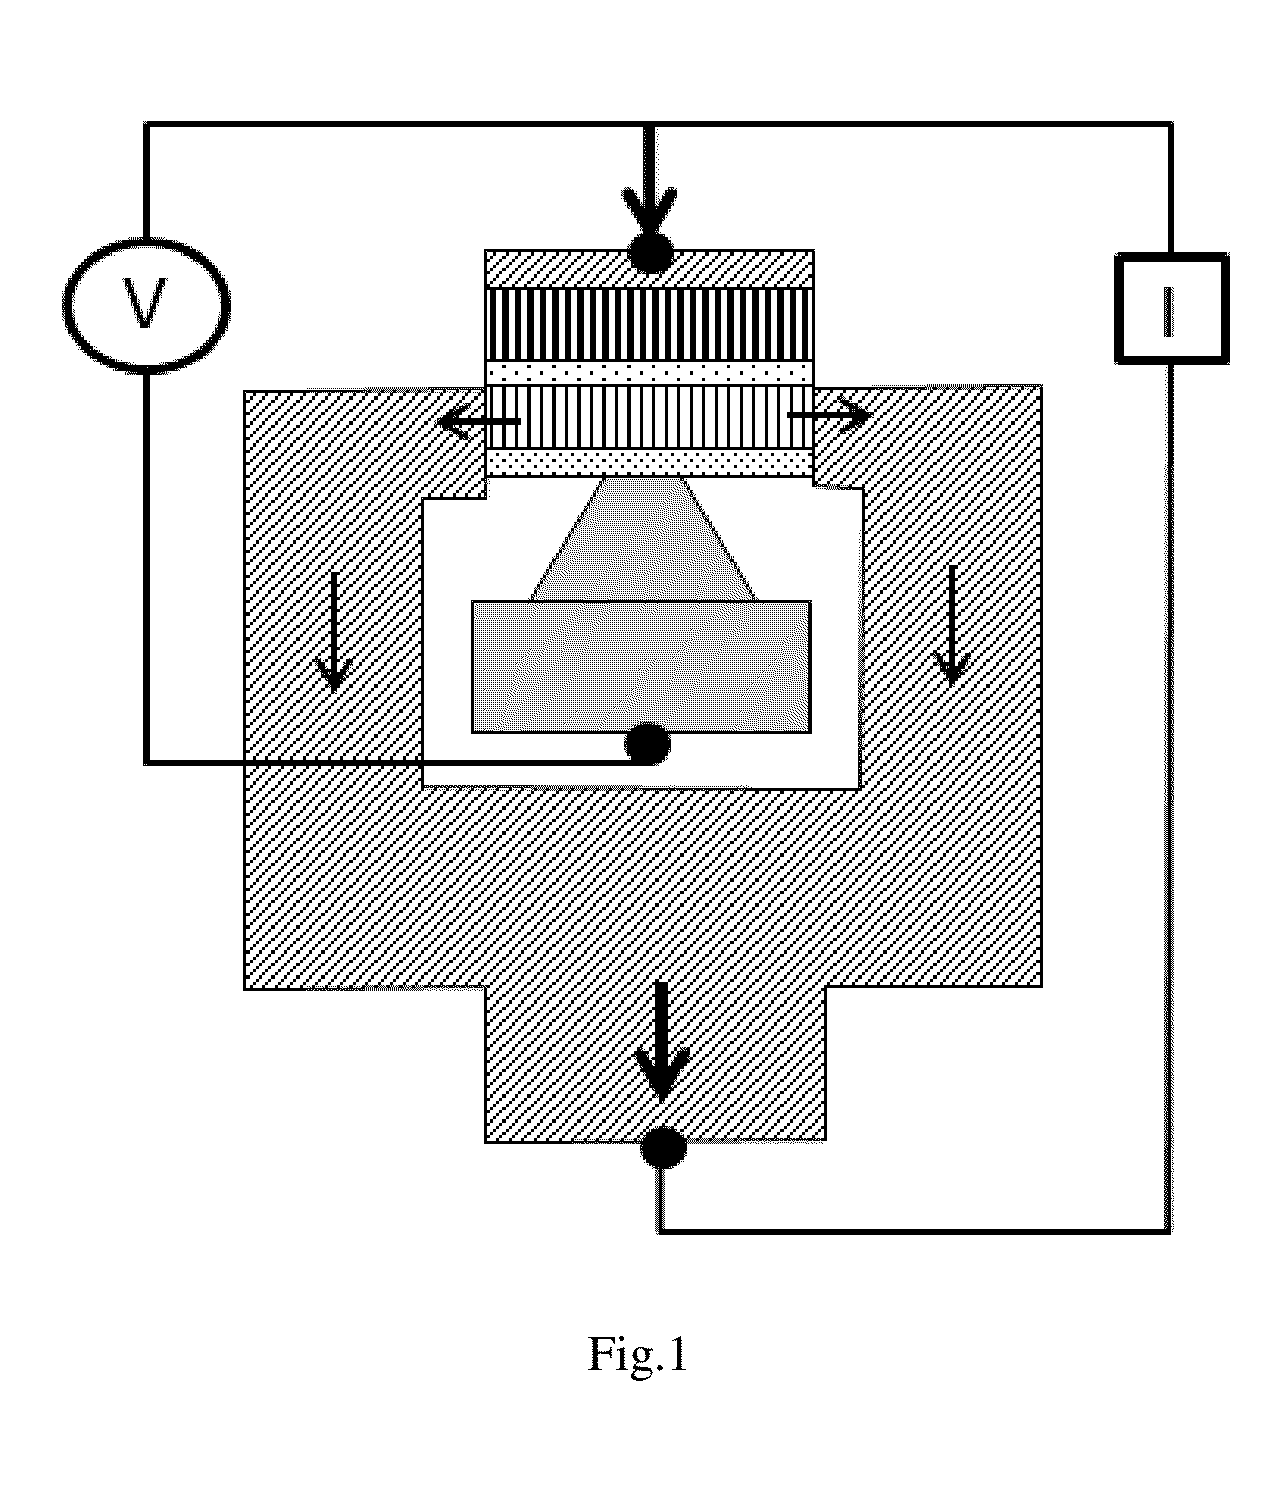 Three-terminal spin transistor magnetic random access memory and the method to make the same